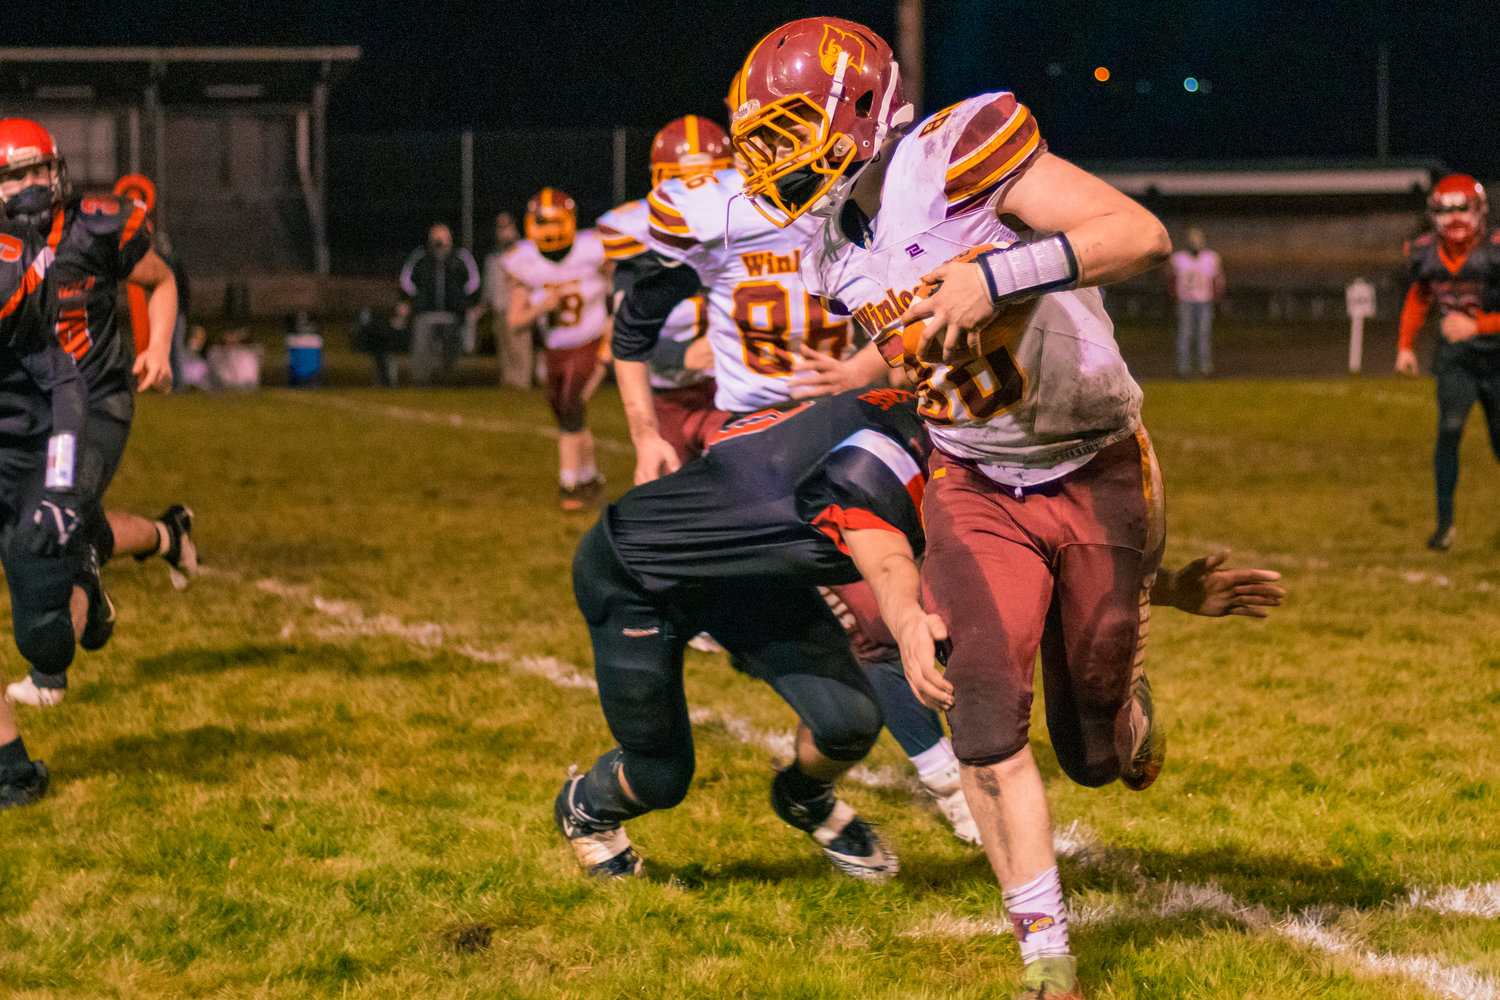 Cardinals’ Collin Regalado (88) runs with the football during a game against the Vikings Friday night in Mossyrock.